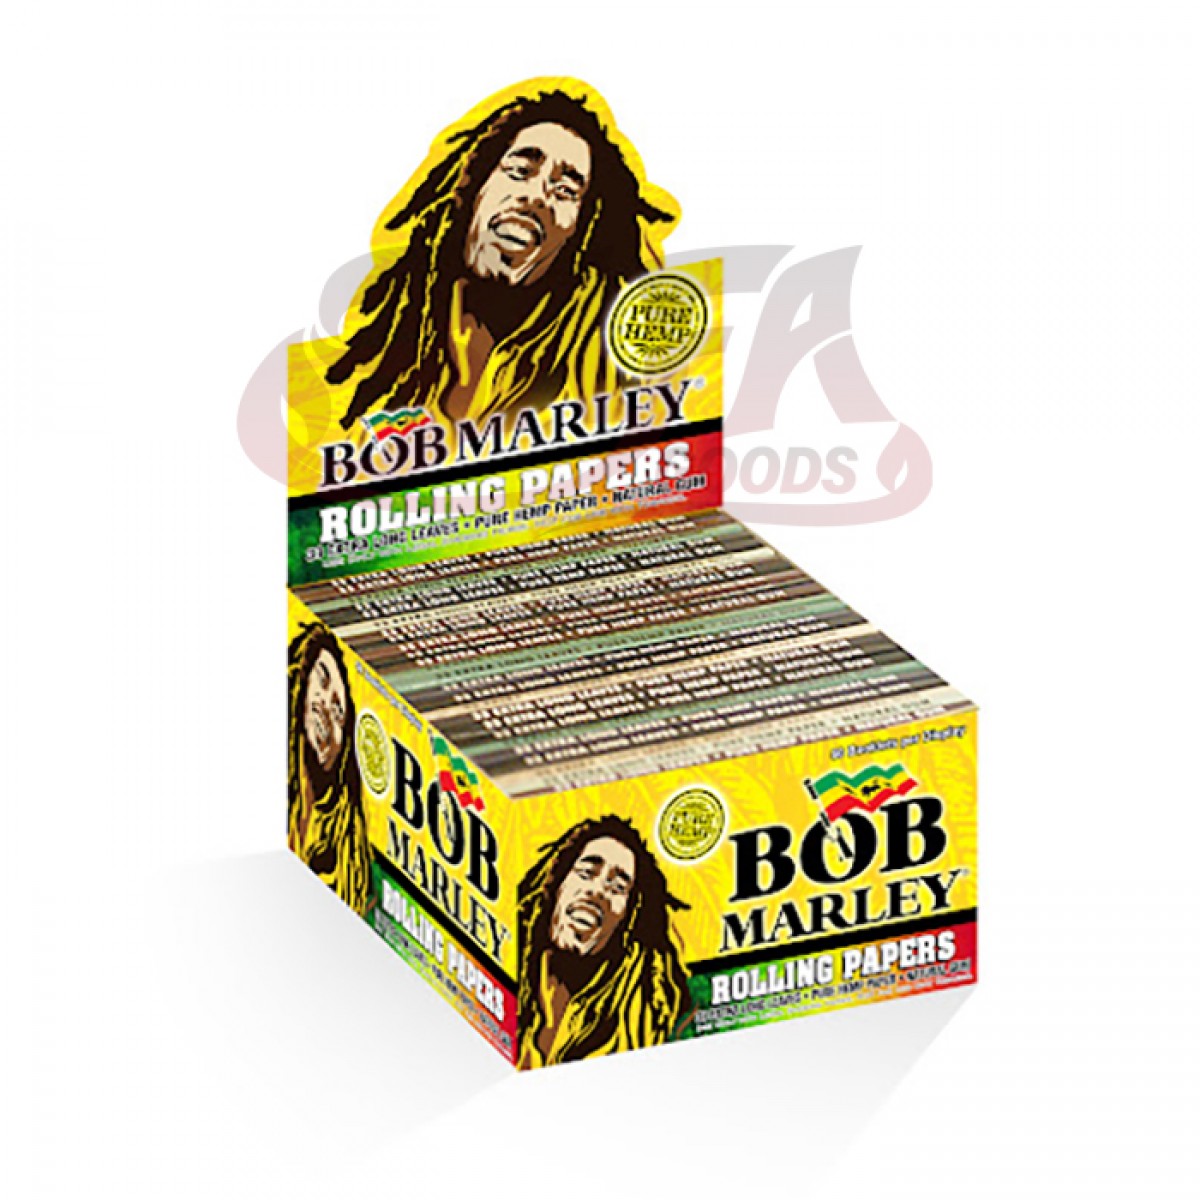 Bob Marley Rolling Papers - Display Box